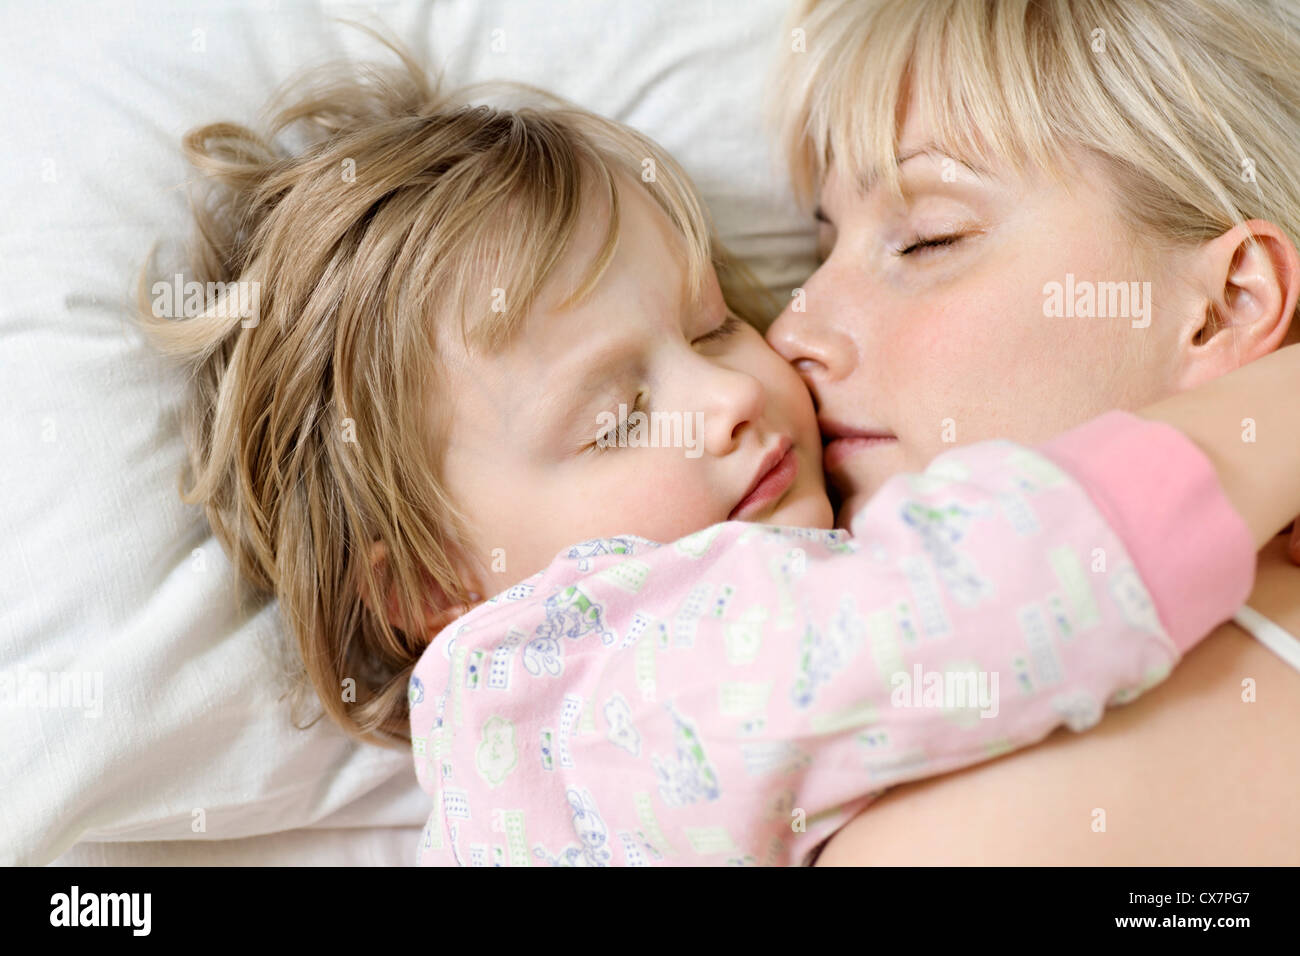 A mother and her young daughter sleeping a bed side by side Stock Photo